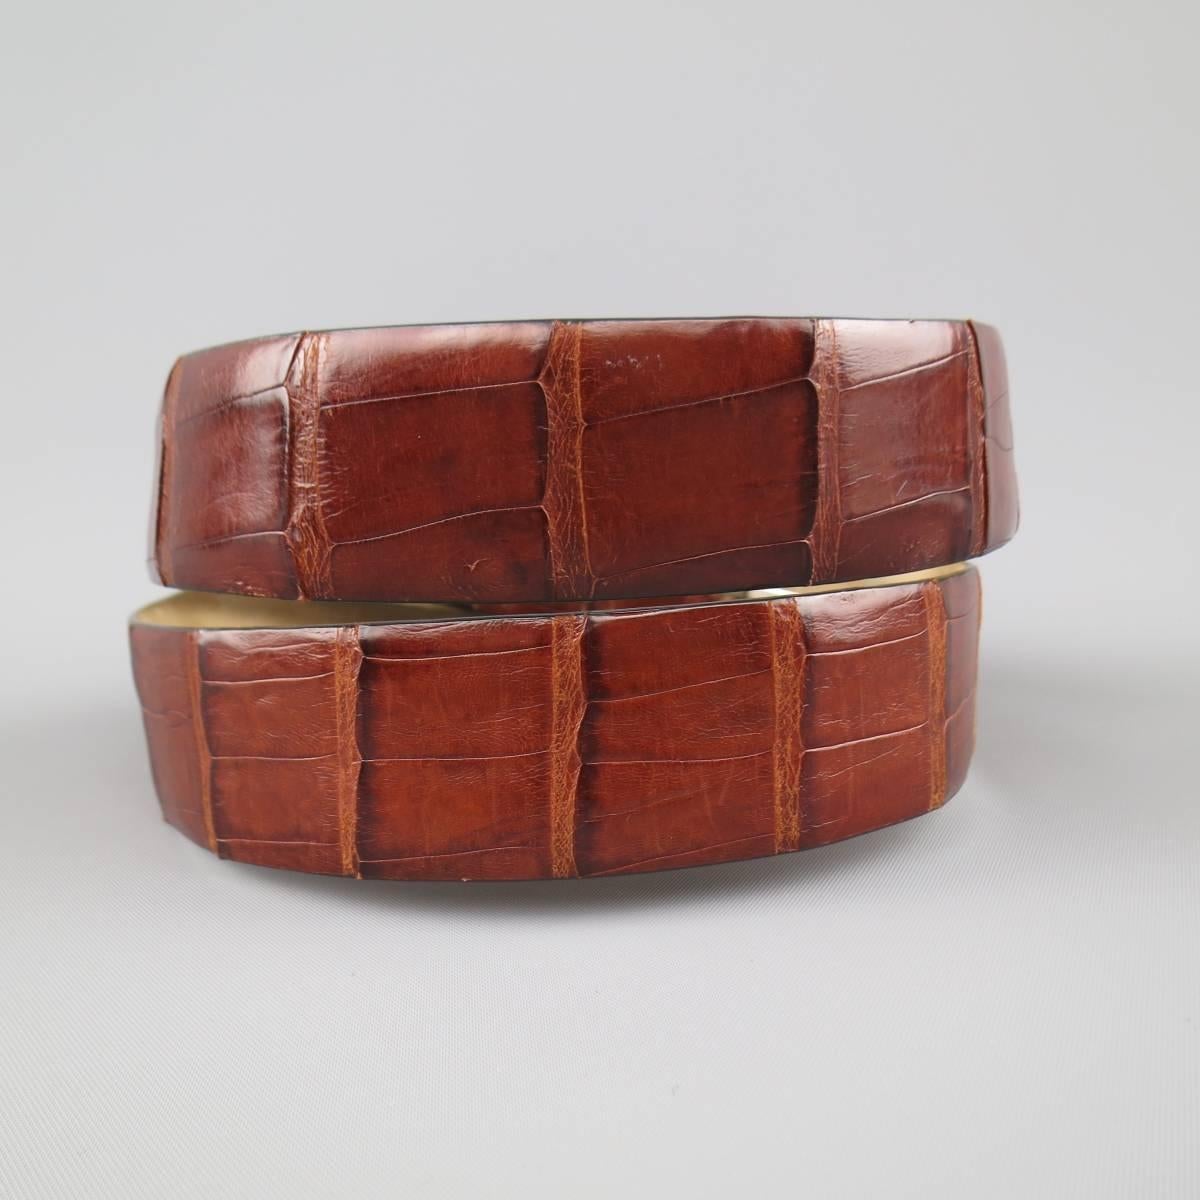 Vintage WILKES BASHFORD dress belt features a warm brown crocodile leather strap with light nubuck liner and silver tone buckle. Internal wear and scuff on loop. Made in Italy.
 
Good Pre-Owned Condition.
Marked: 85/32
 
Measurements:
 
Length: 40